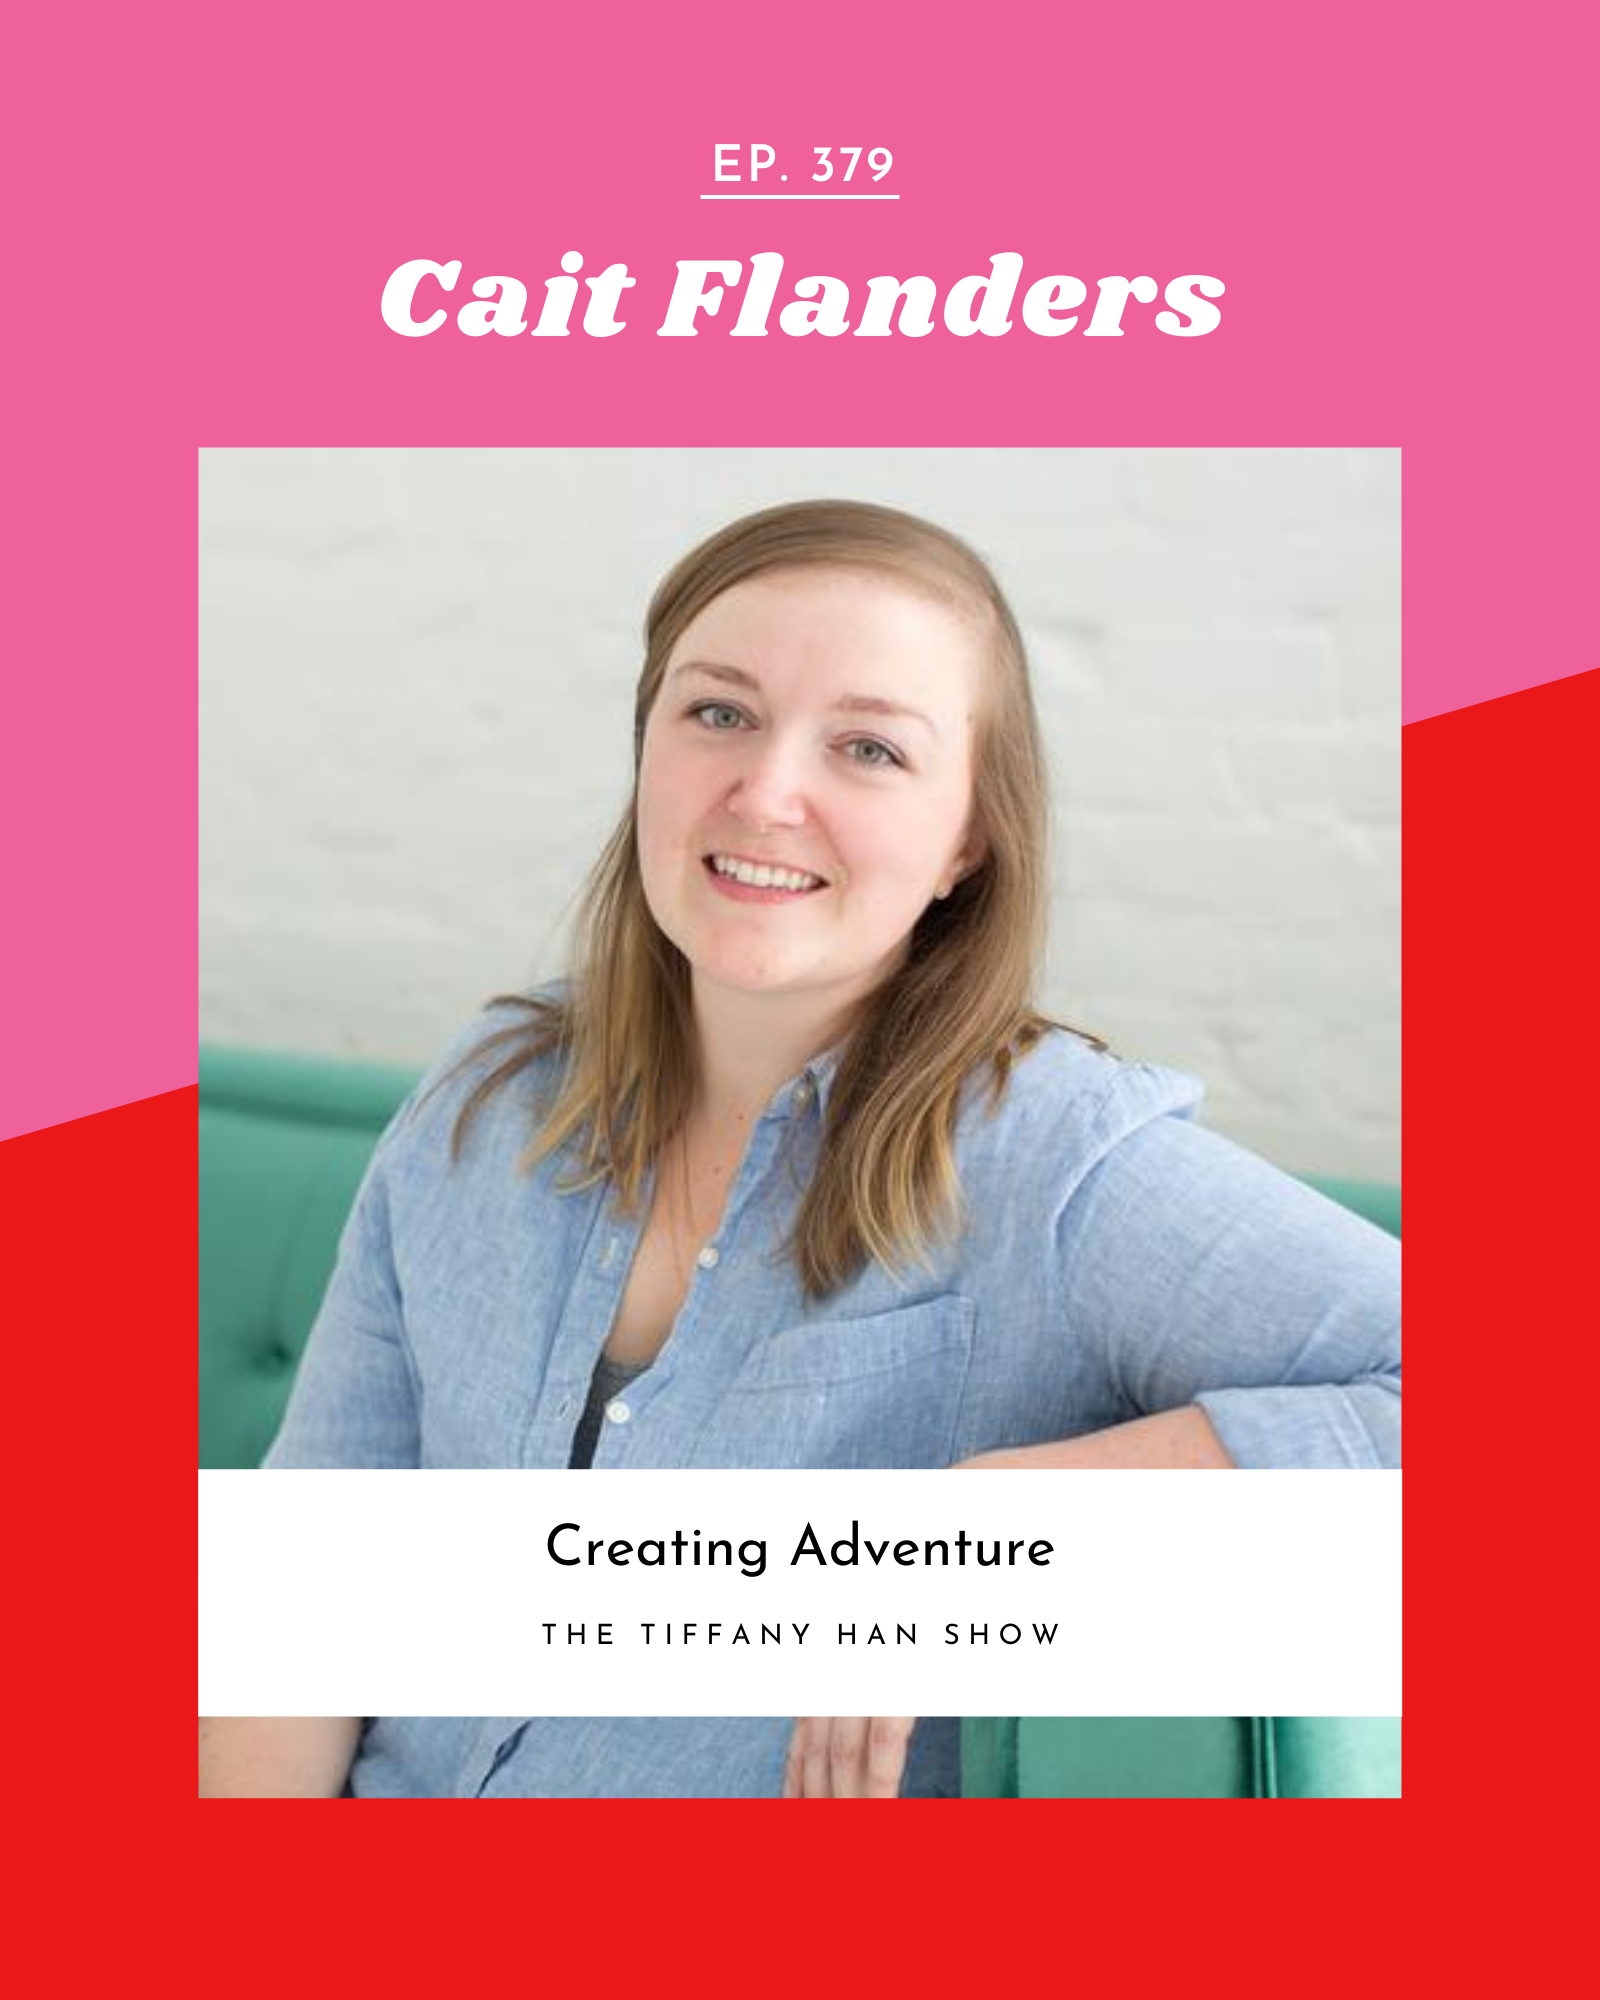 Creating Adventure with Cait Flanders